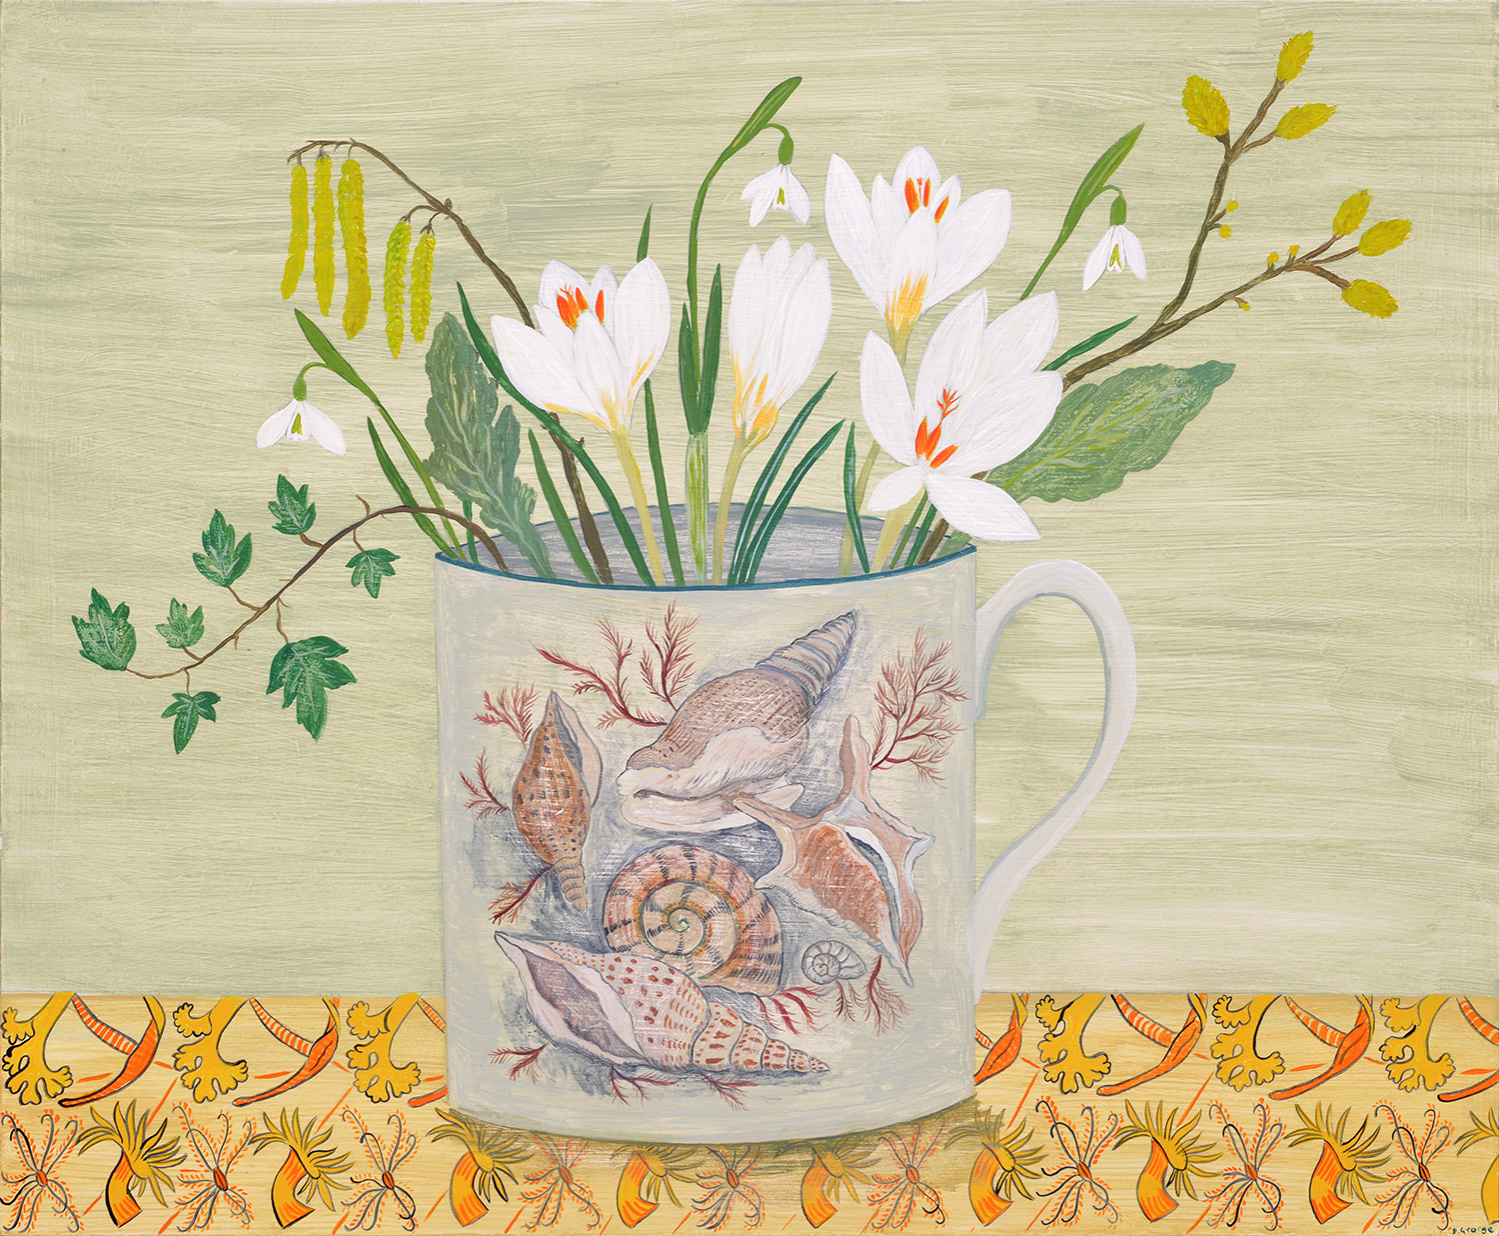 Shell Cup and Crocus by Debbie George